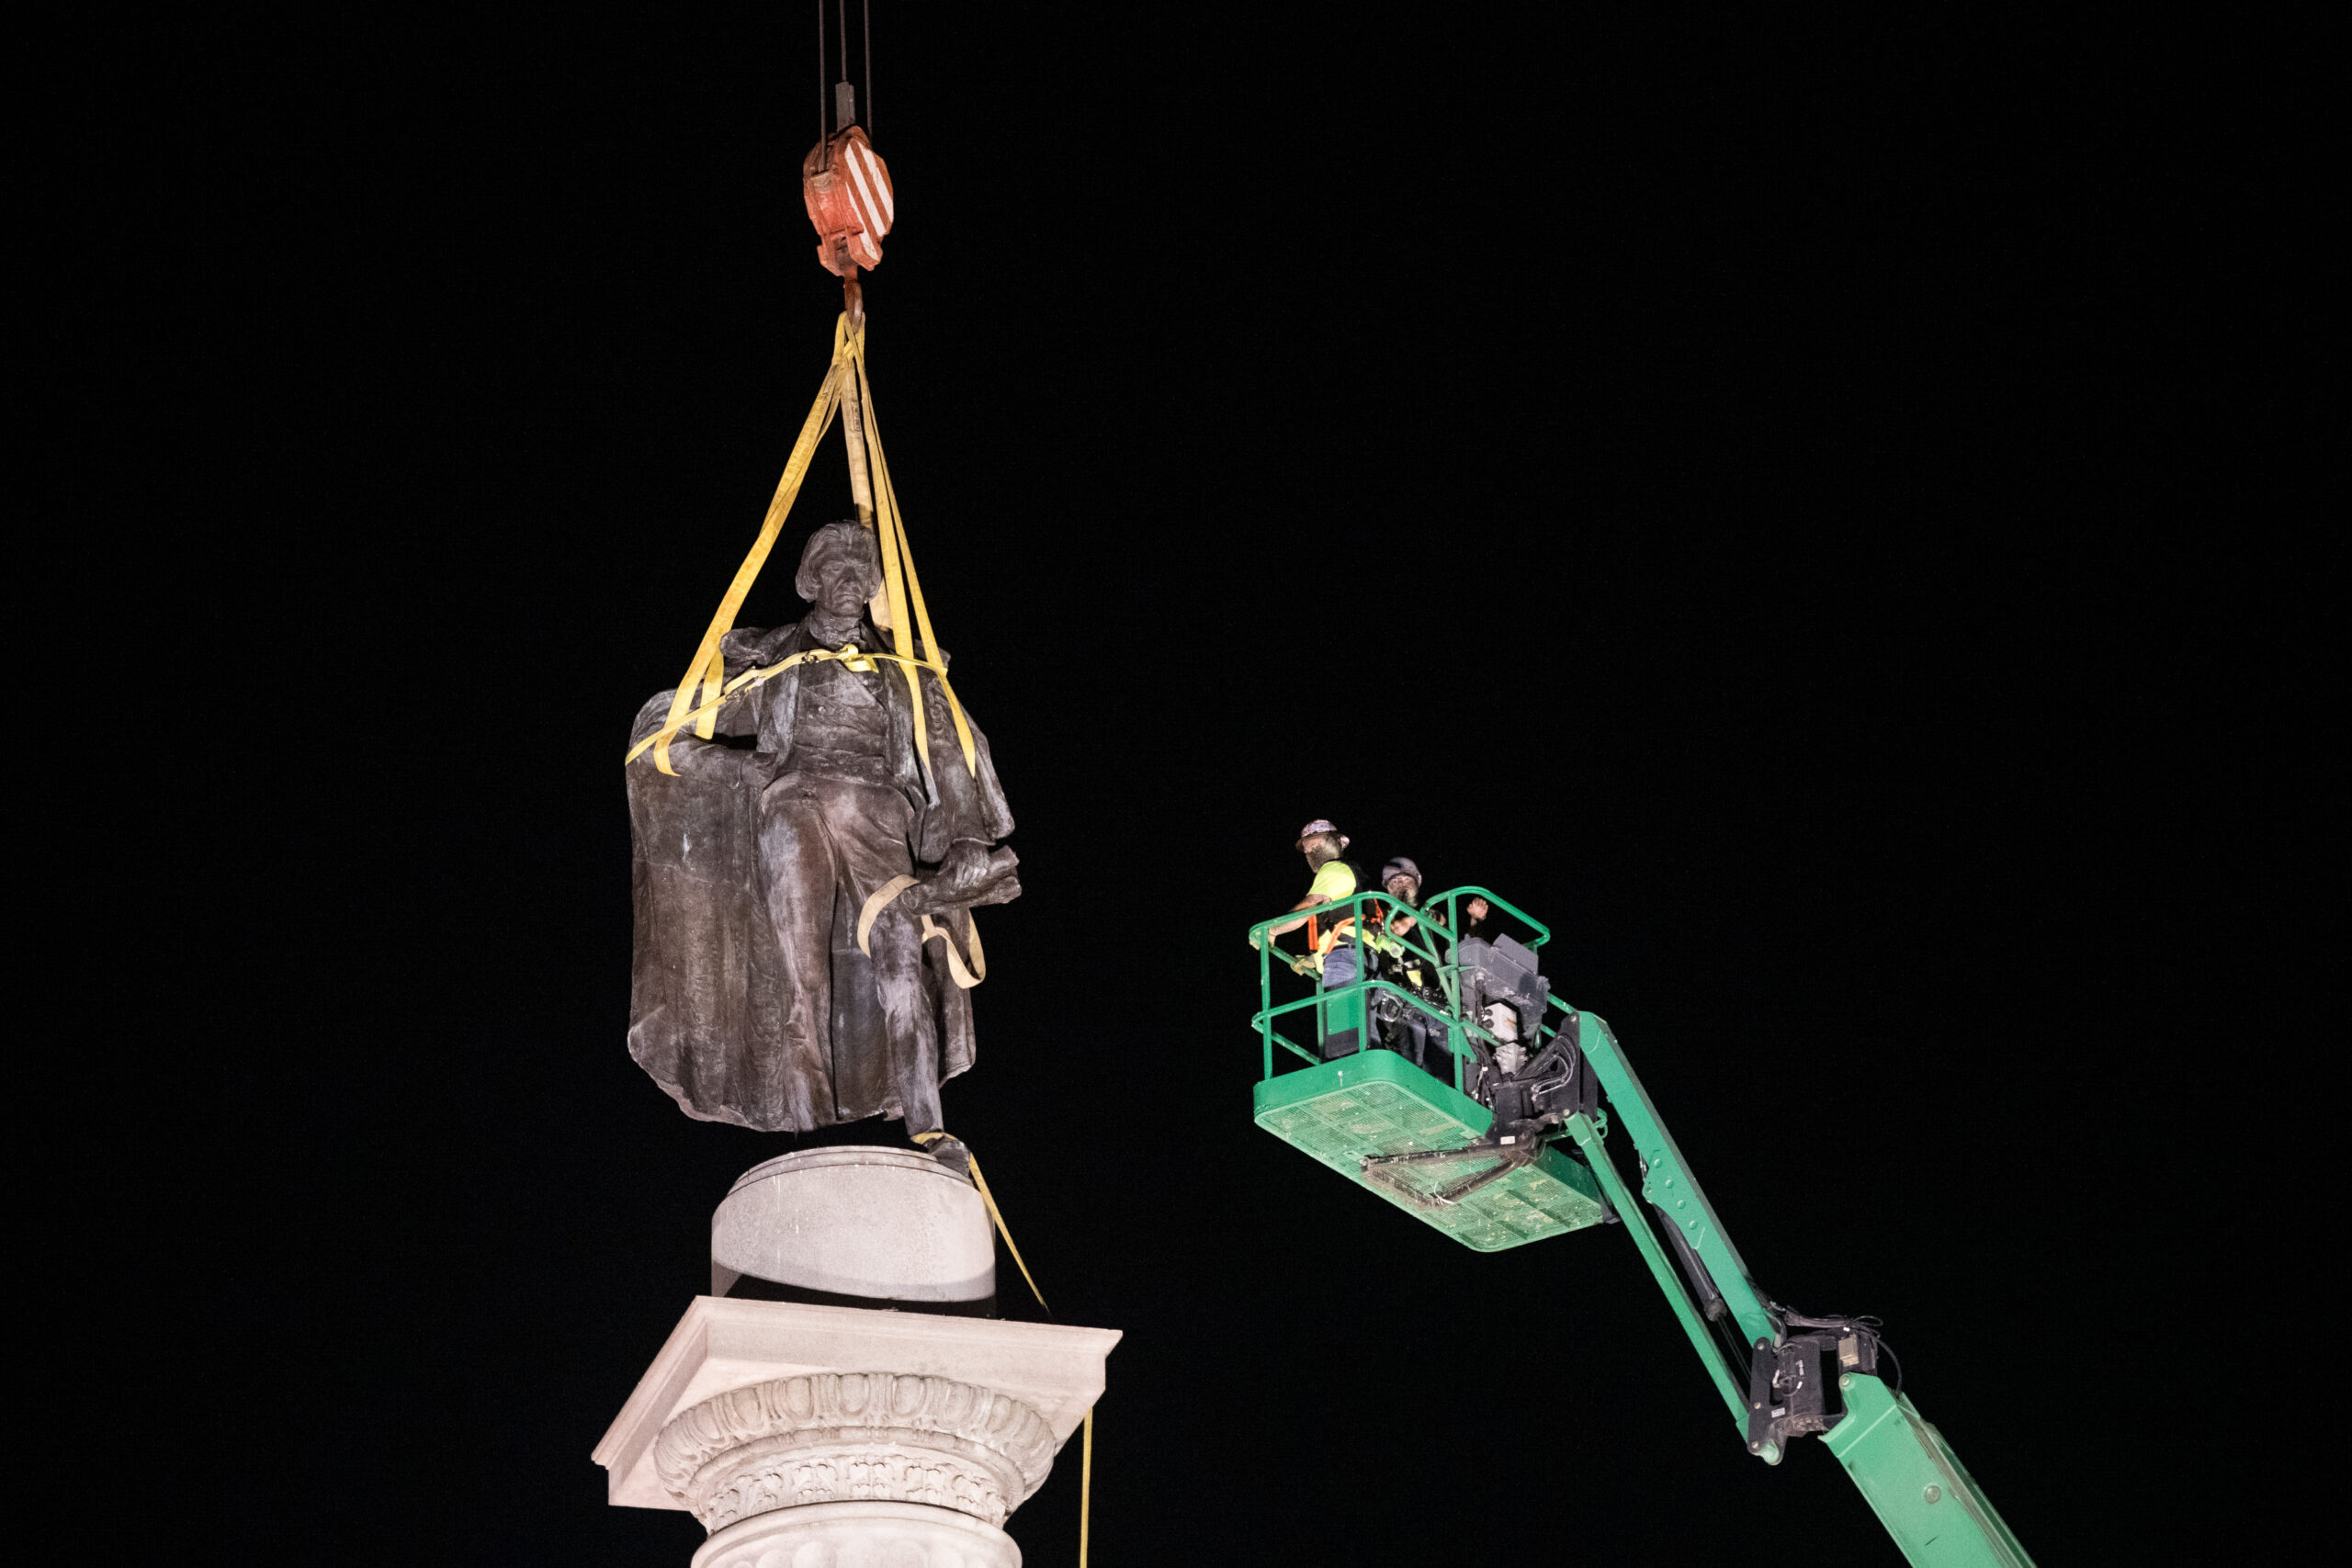 Workers remove statue of John C. Calhoun in Marion Square, Charleston, South Carolina, June 24, 2020 (Sean Rayford/Getty Images)